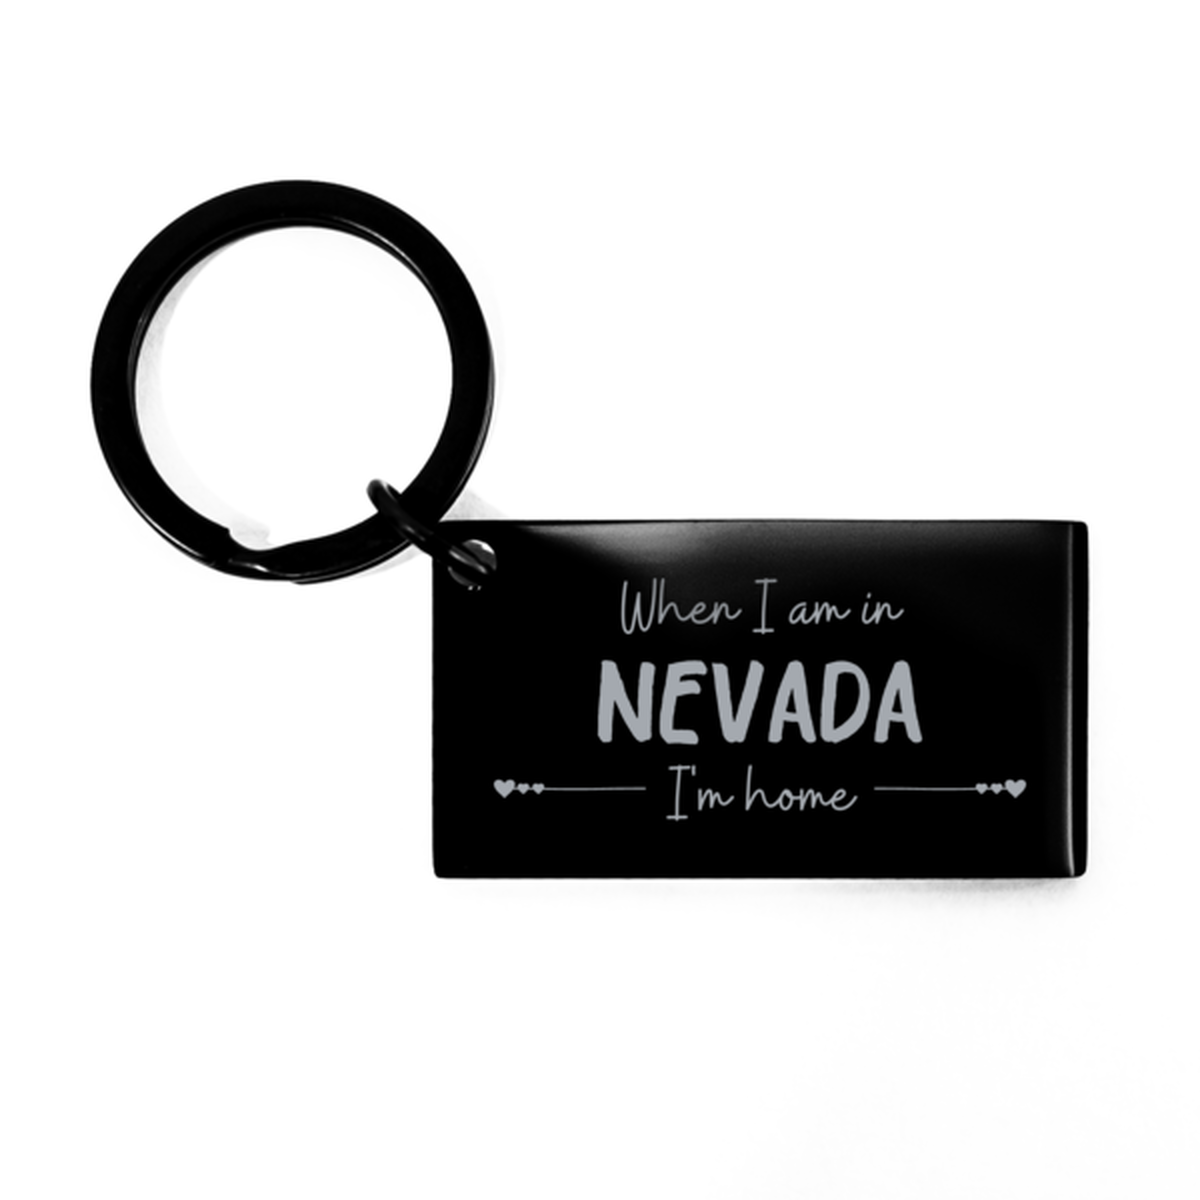 When I am in Nevada I'm home Keychain, Cheap Gifts For Nevada, State Nevada Birthday Gifts for Friends Coworker